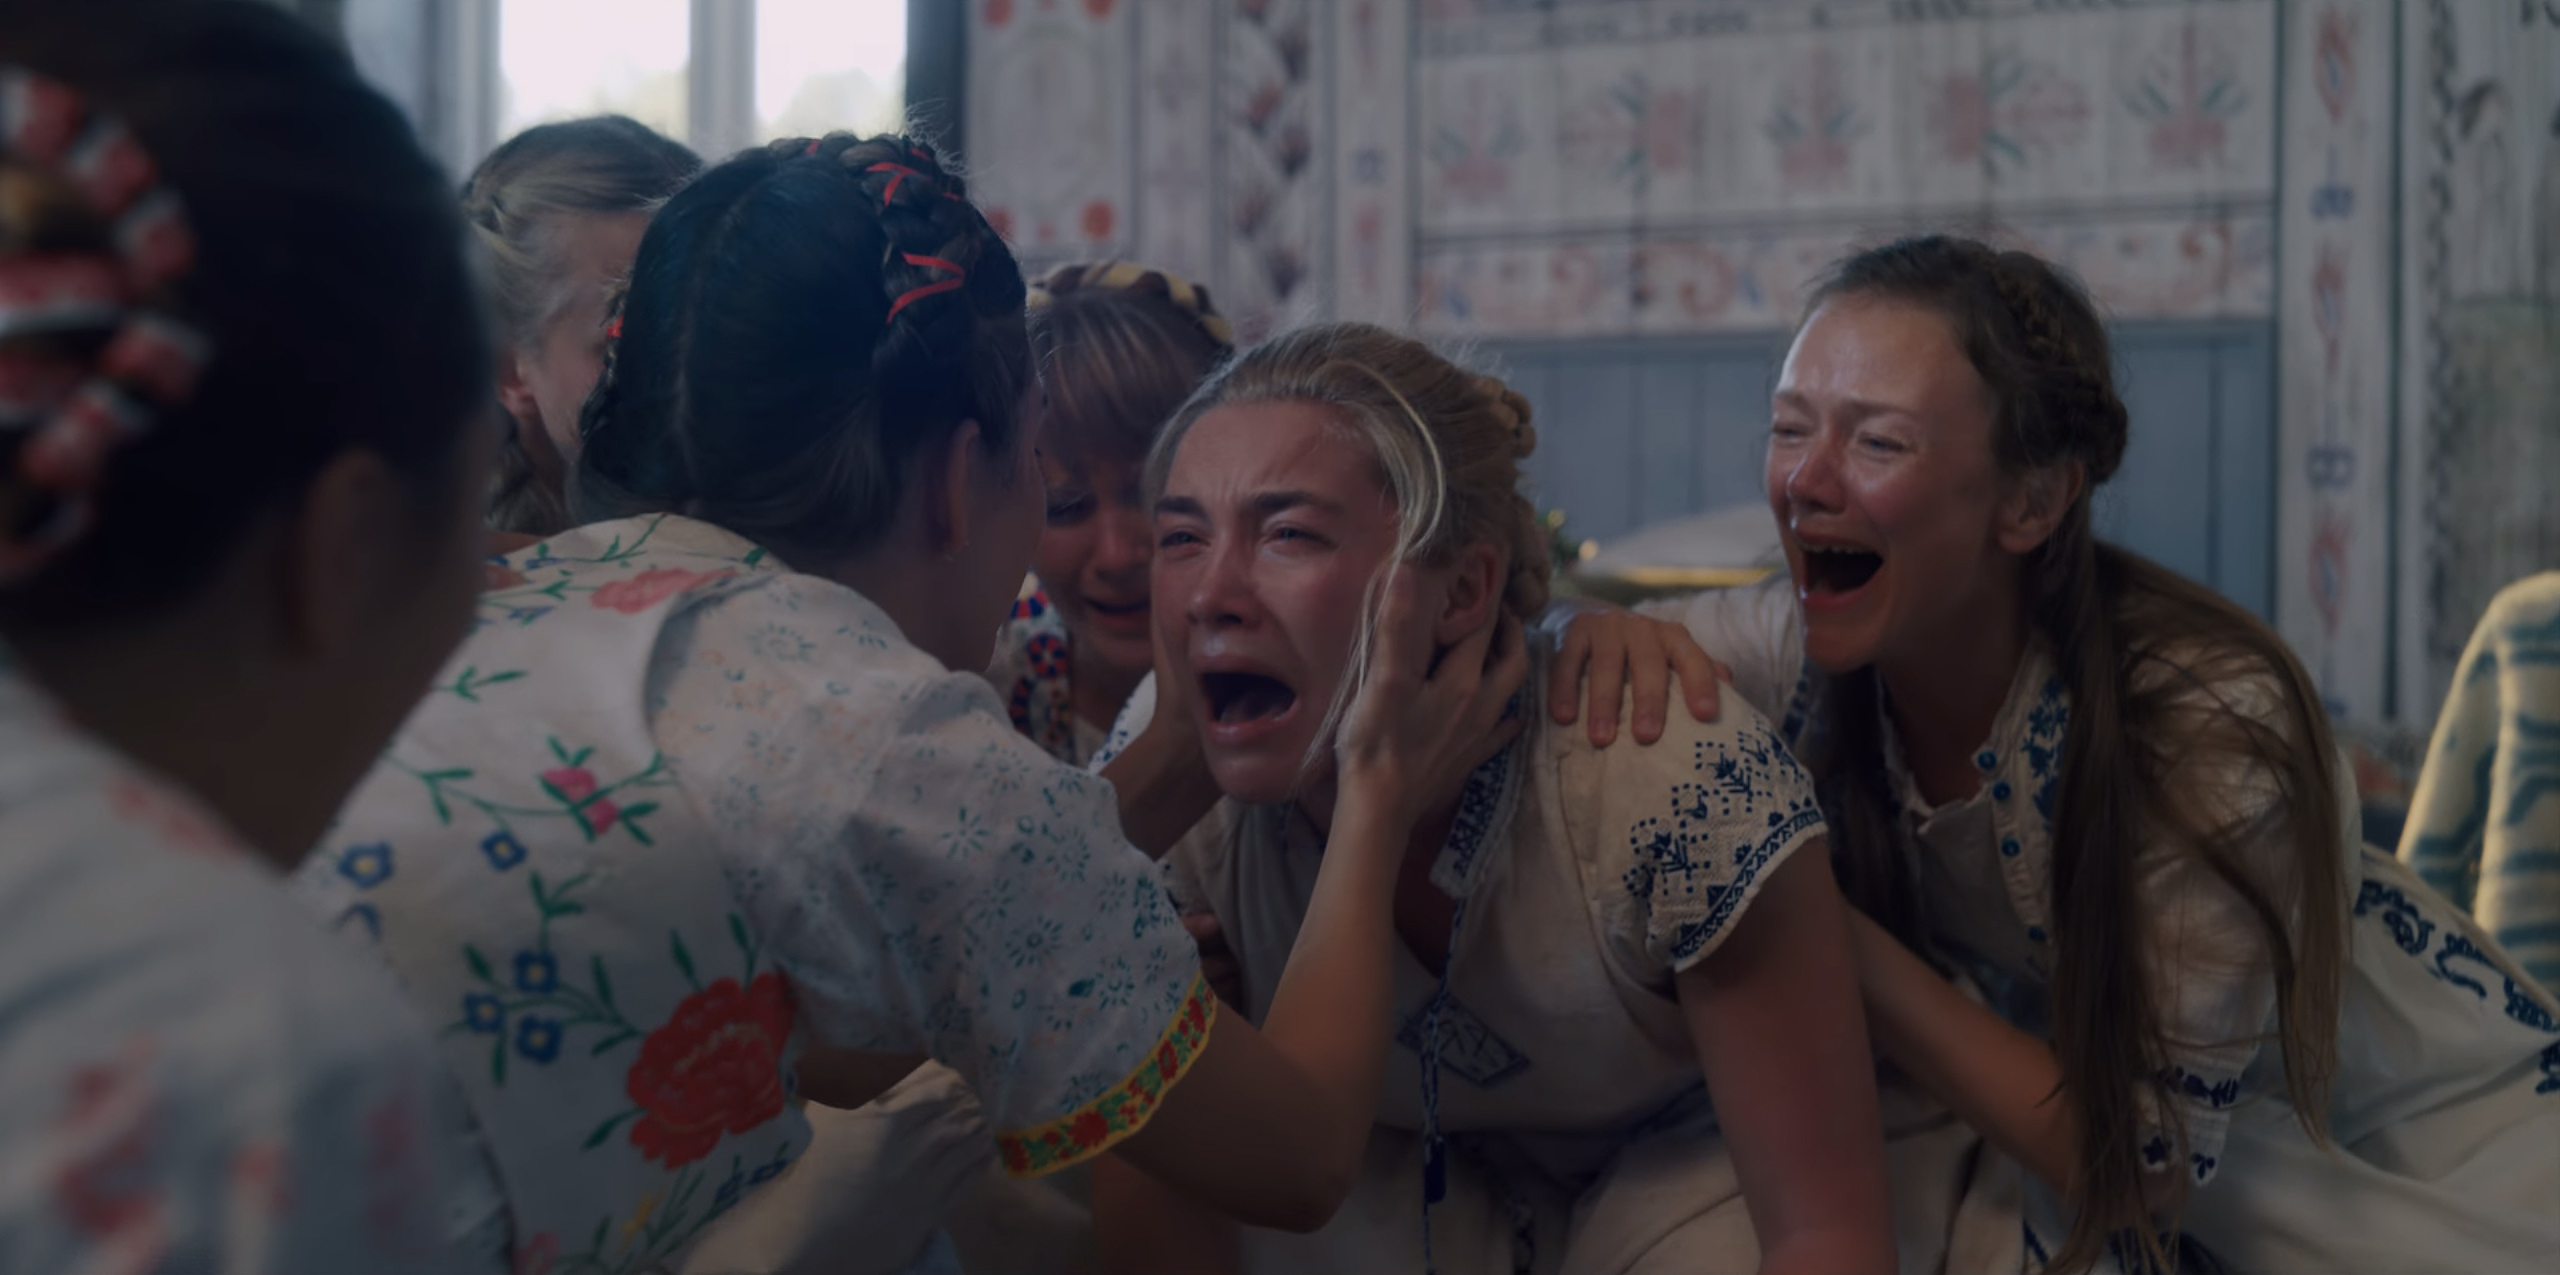 Dani in Midsommar experiences a common empathy act as the reality of her relationships sets in.
